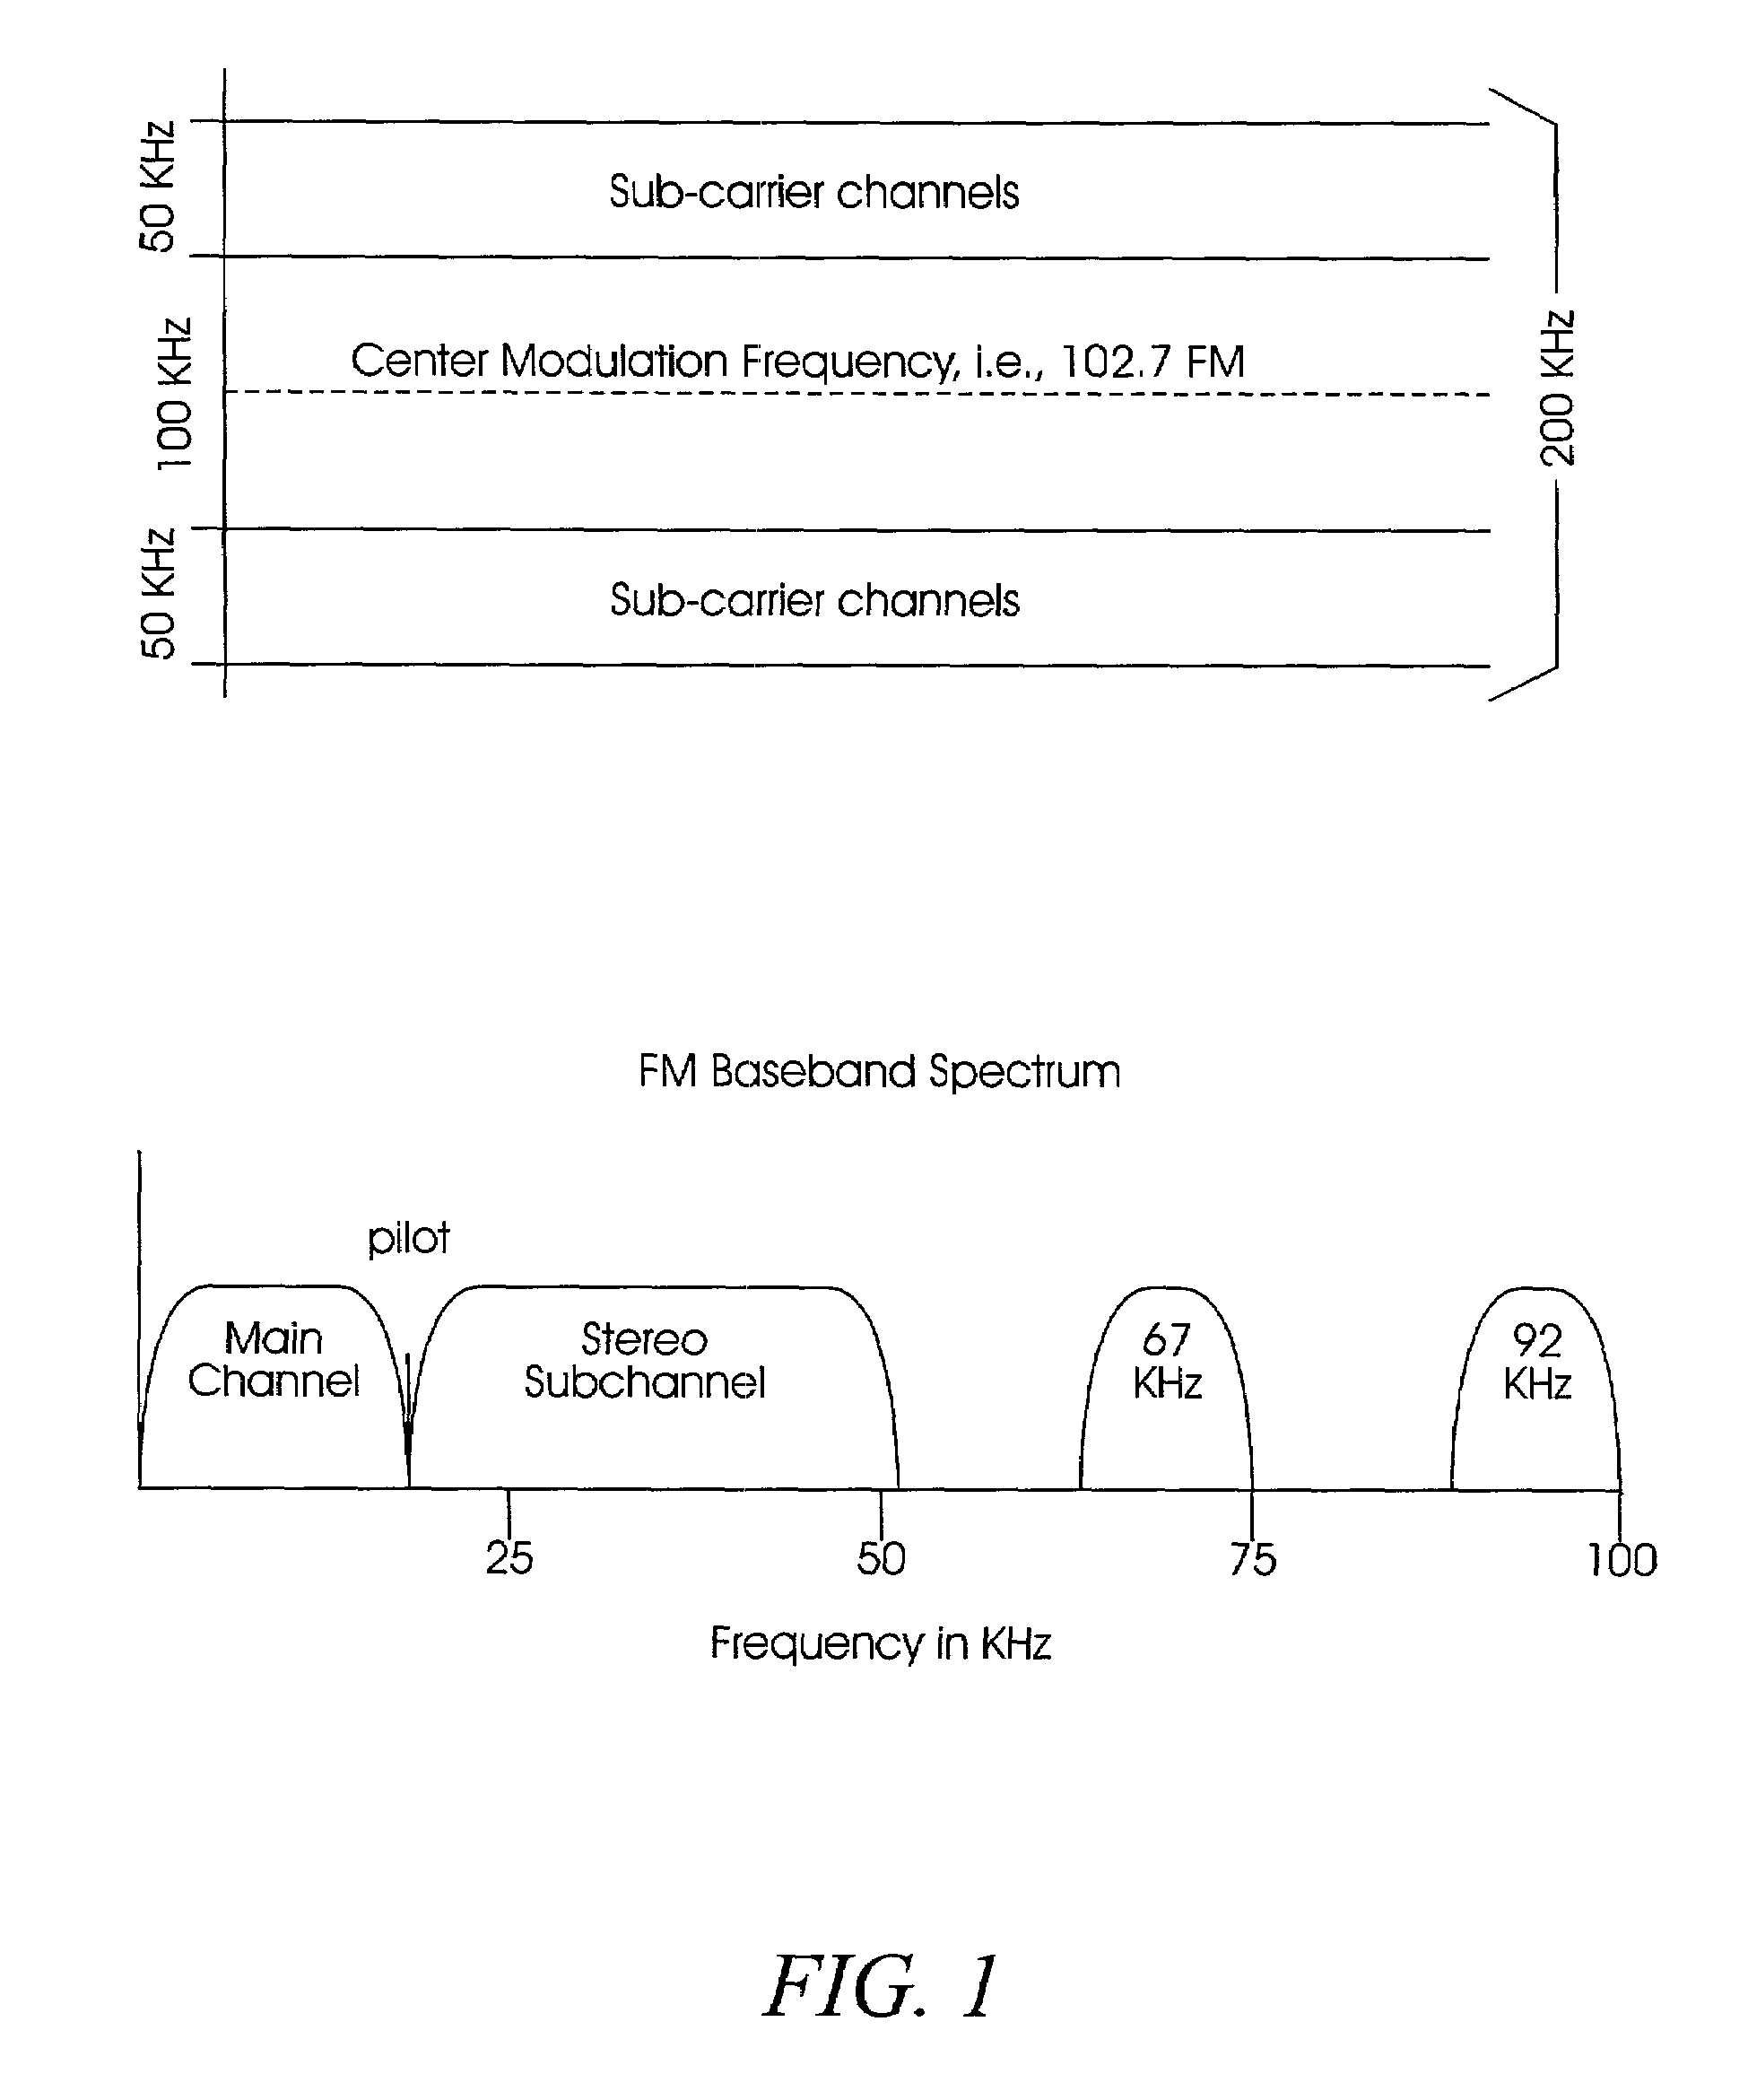 Method and apparatus using geographical position to provide authenticated, secure, radio frequency communication between a gaming host and a remote gaming device